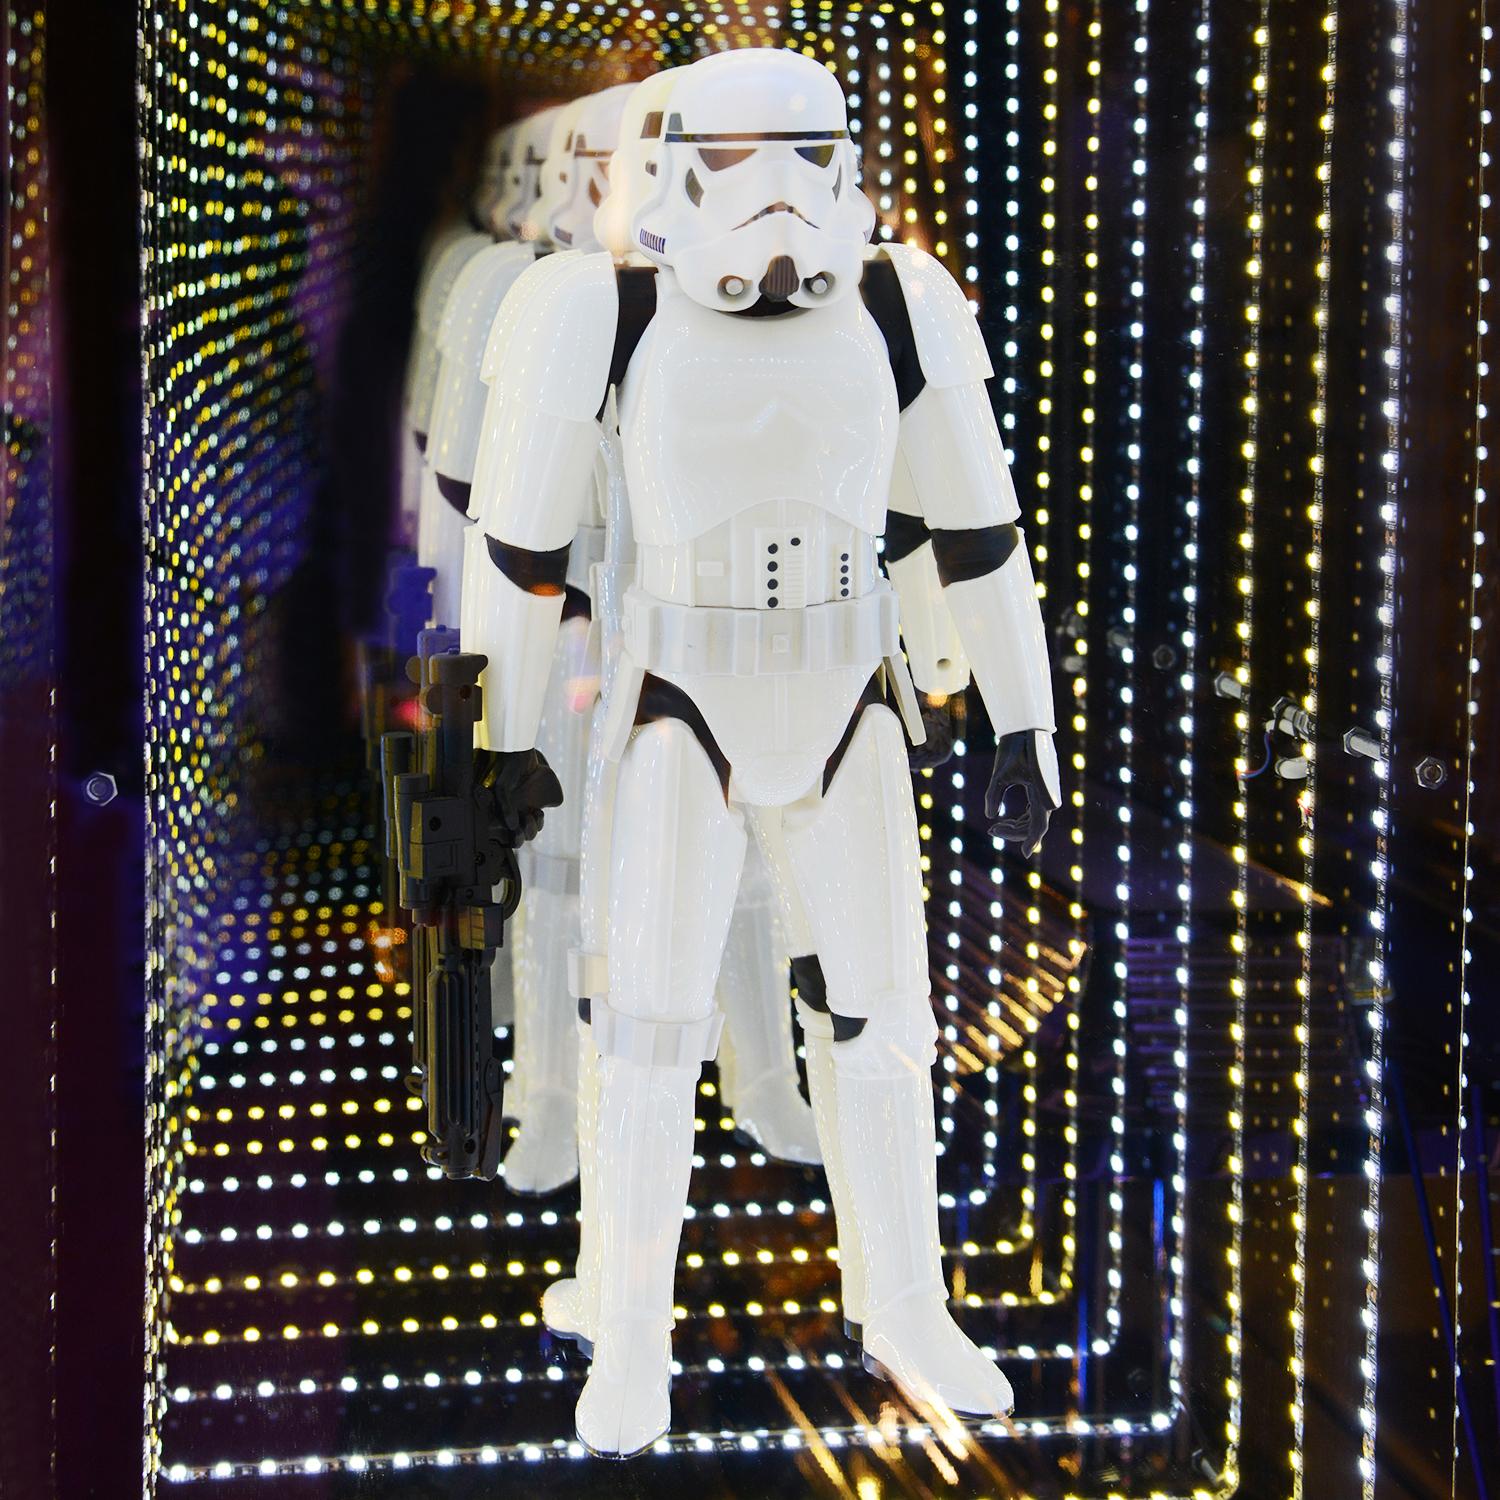 Mirror Wall Decoration Stormtrooper Low made with led 
lights with mirrored glass and plexiglass creating an infiny 
mirrored effect. With lacquered resin white stormtrooper 
Star Wars. Exceptional piece made in 2023 by Raphael Fenice.